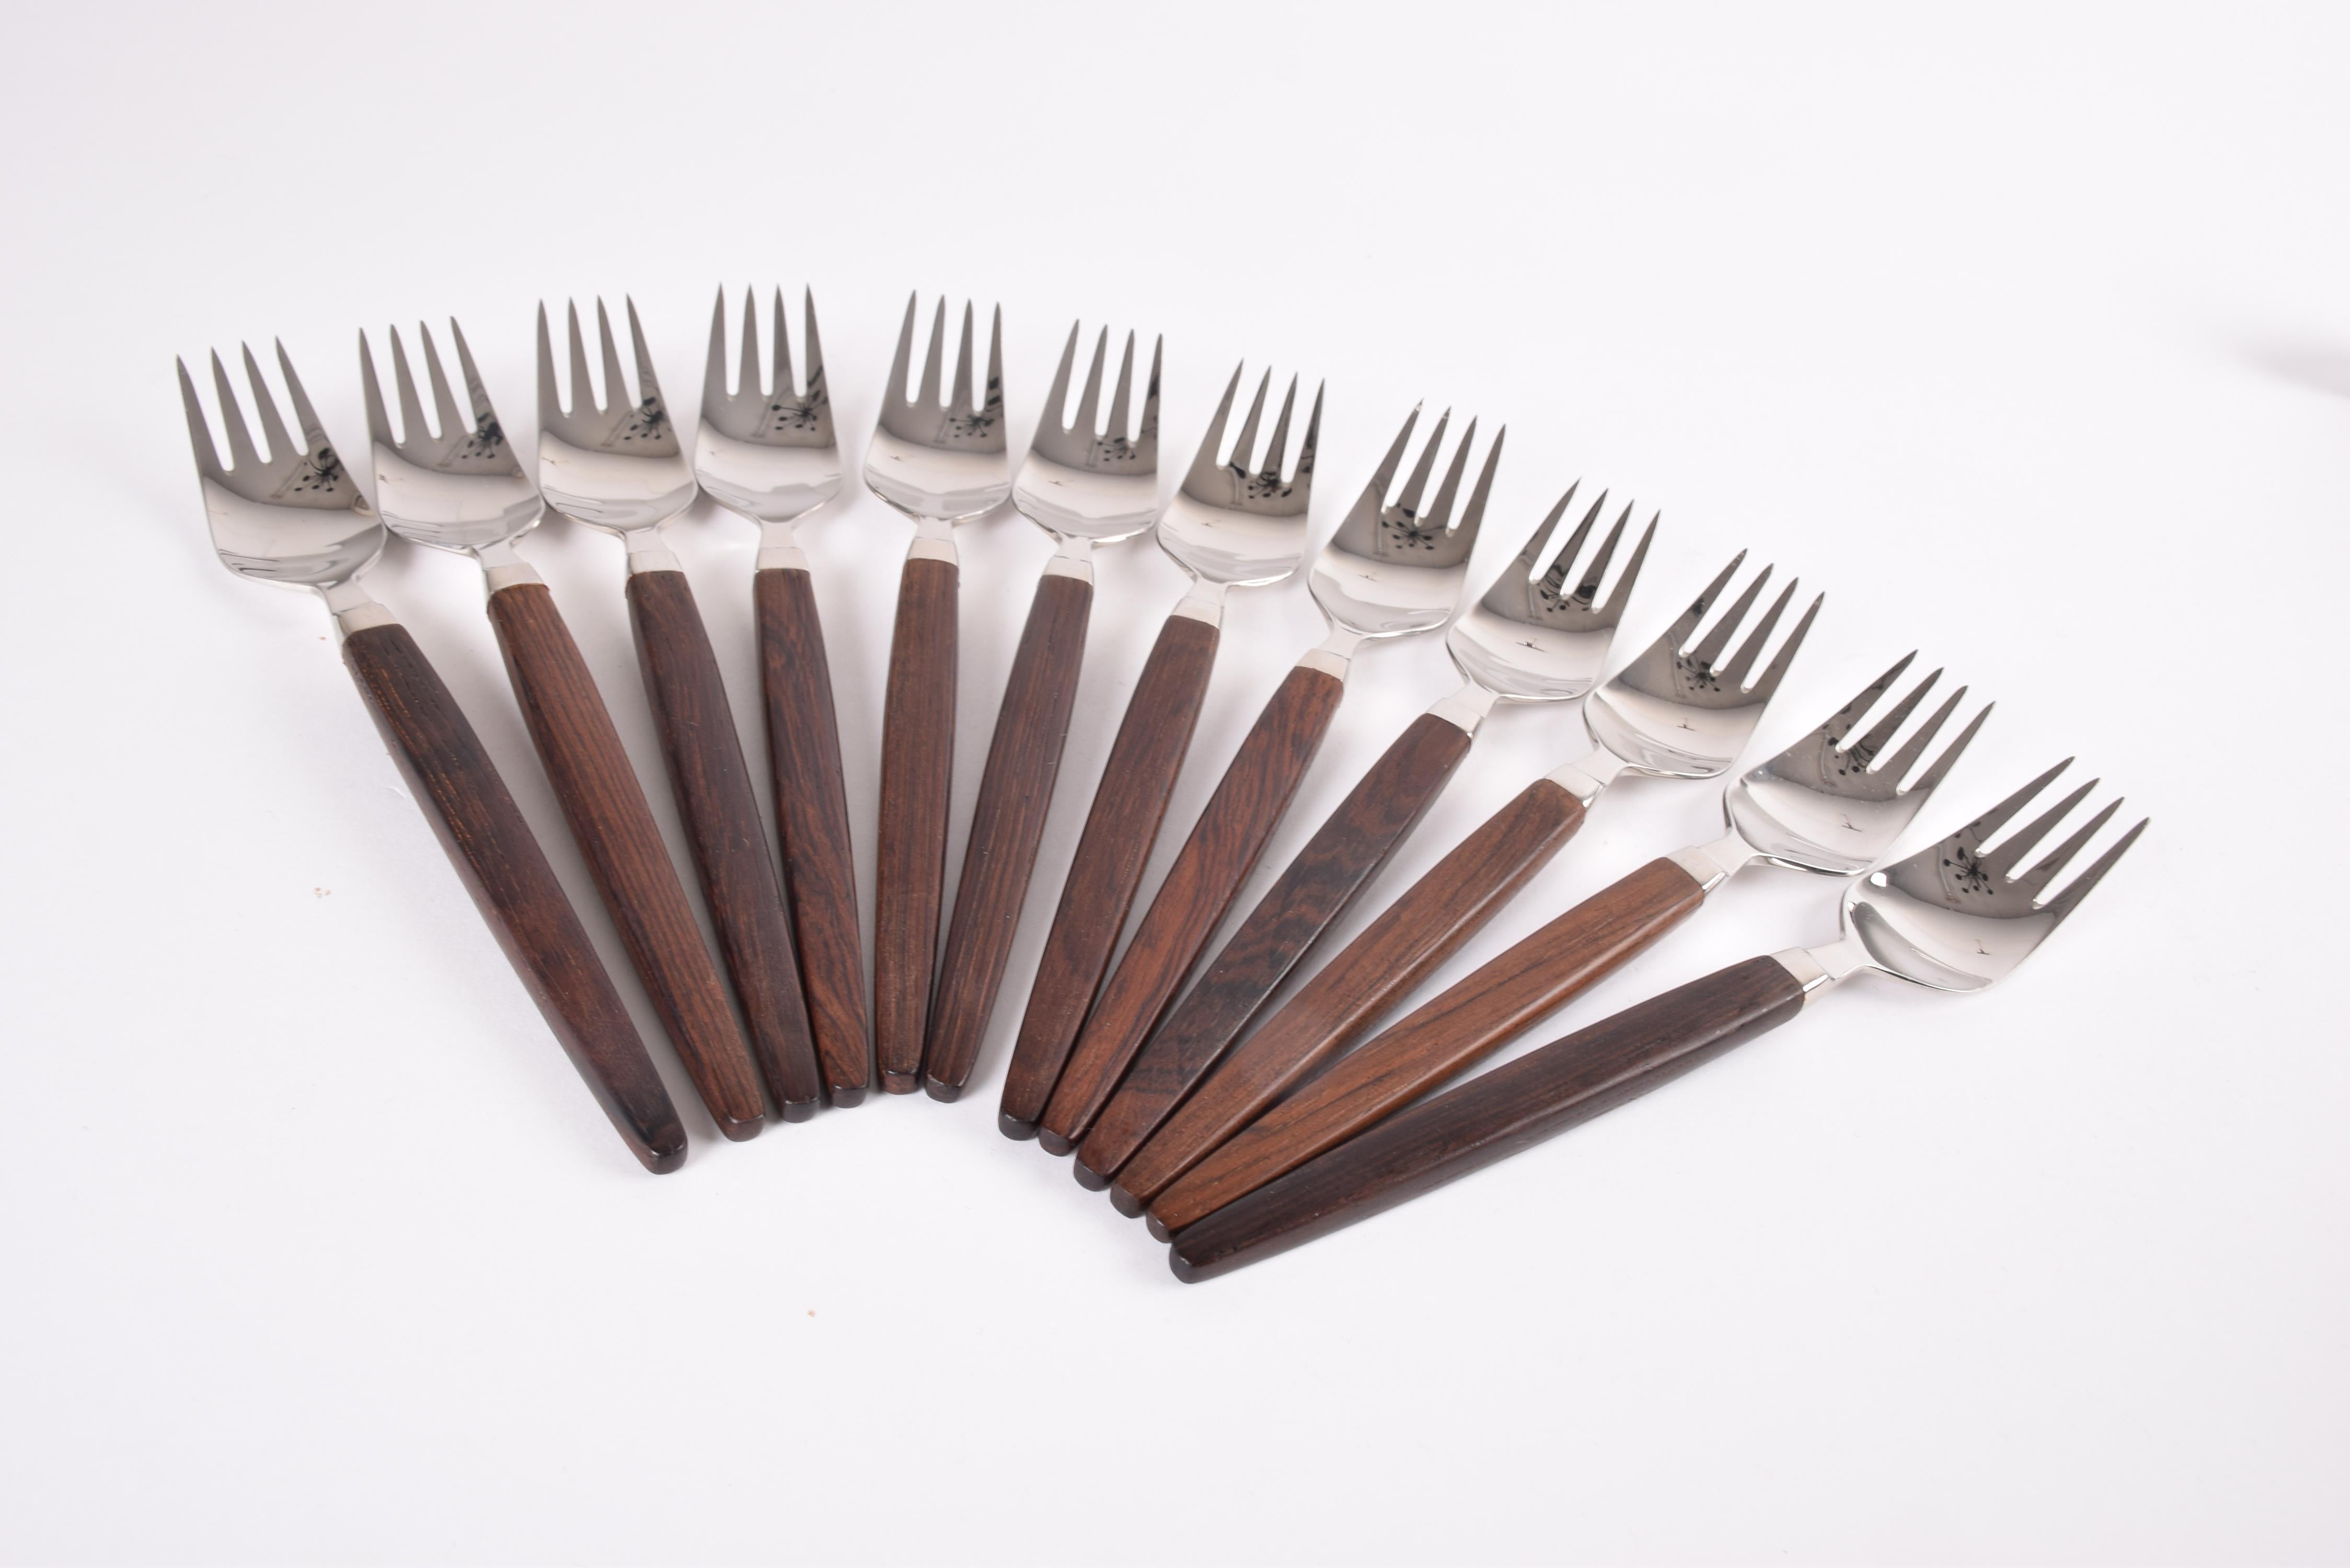 Set of 43 pieces in excellent vintage condition.

Set of Danish Modern flatware from the 